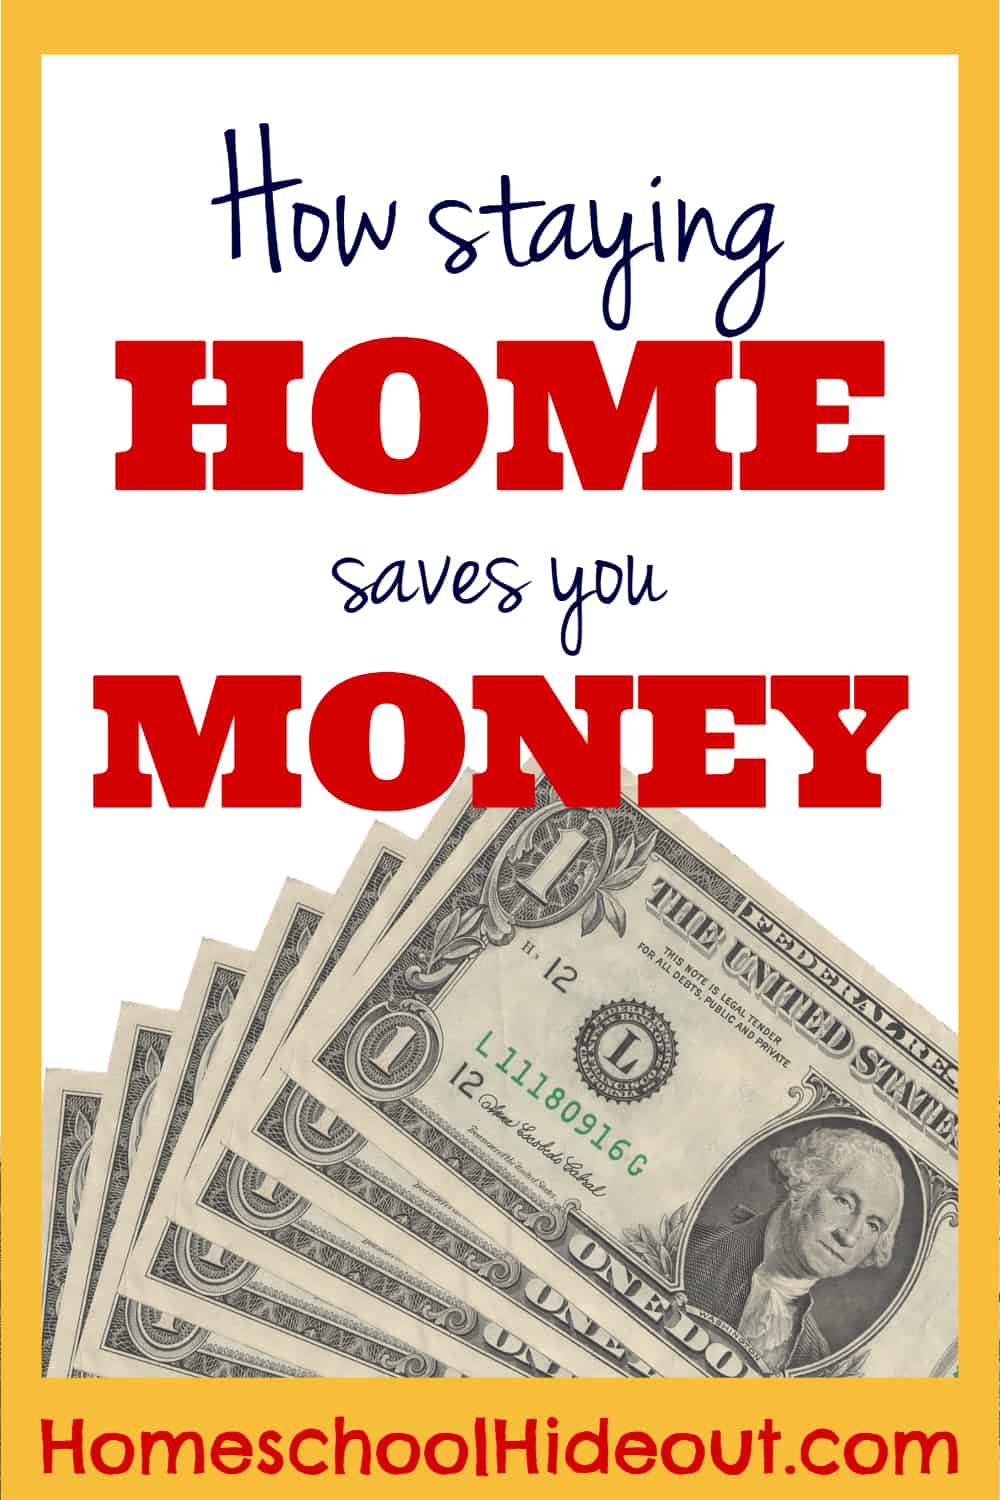 Staying home to save money is one of the simplest ways to keep your budget in check. No gas, no impulse buys, no drive-thrus. The ideas here for staying sane are a great addition!